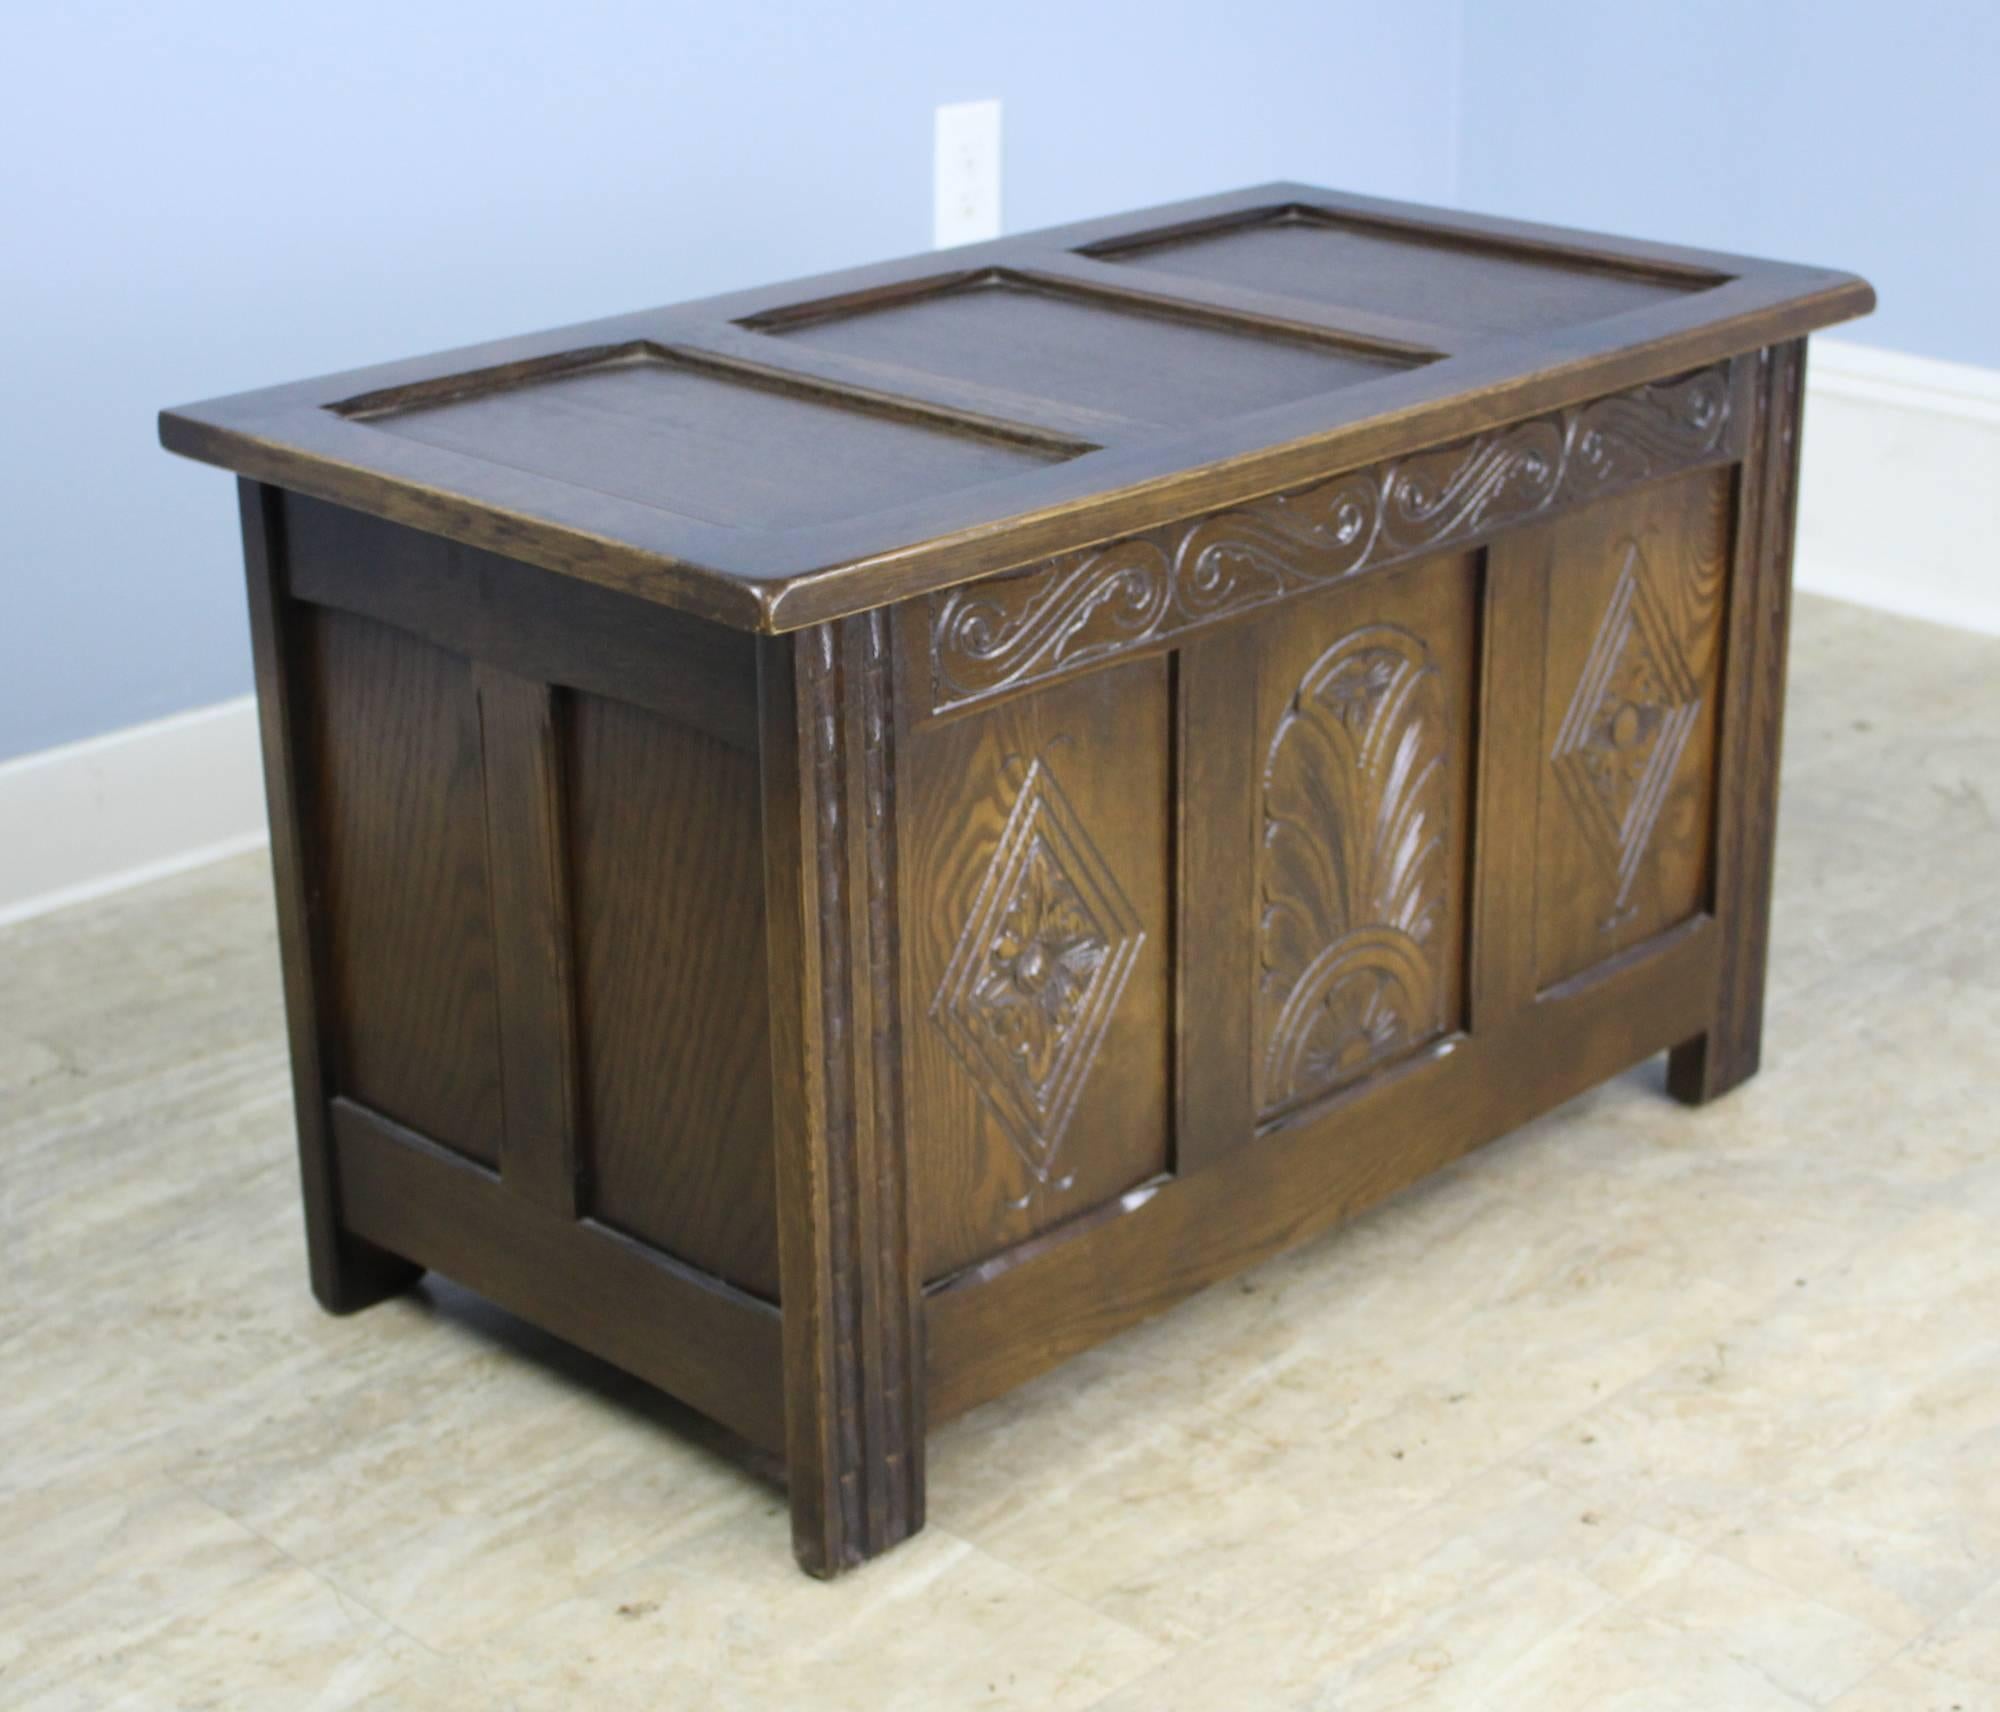 A small three-panel oak box with stylized carvings on the front. Excellent small storage and very clean inside.